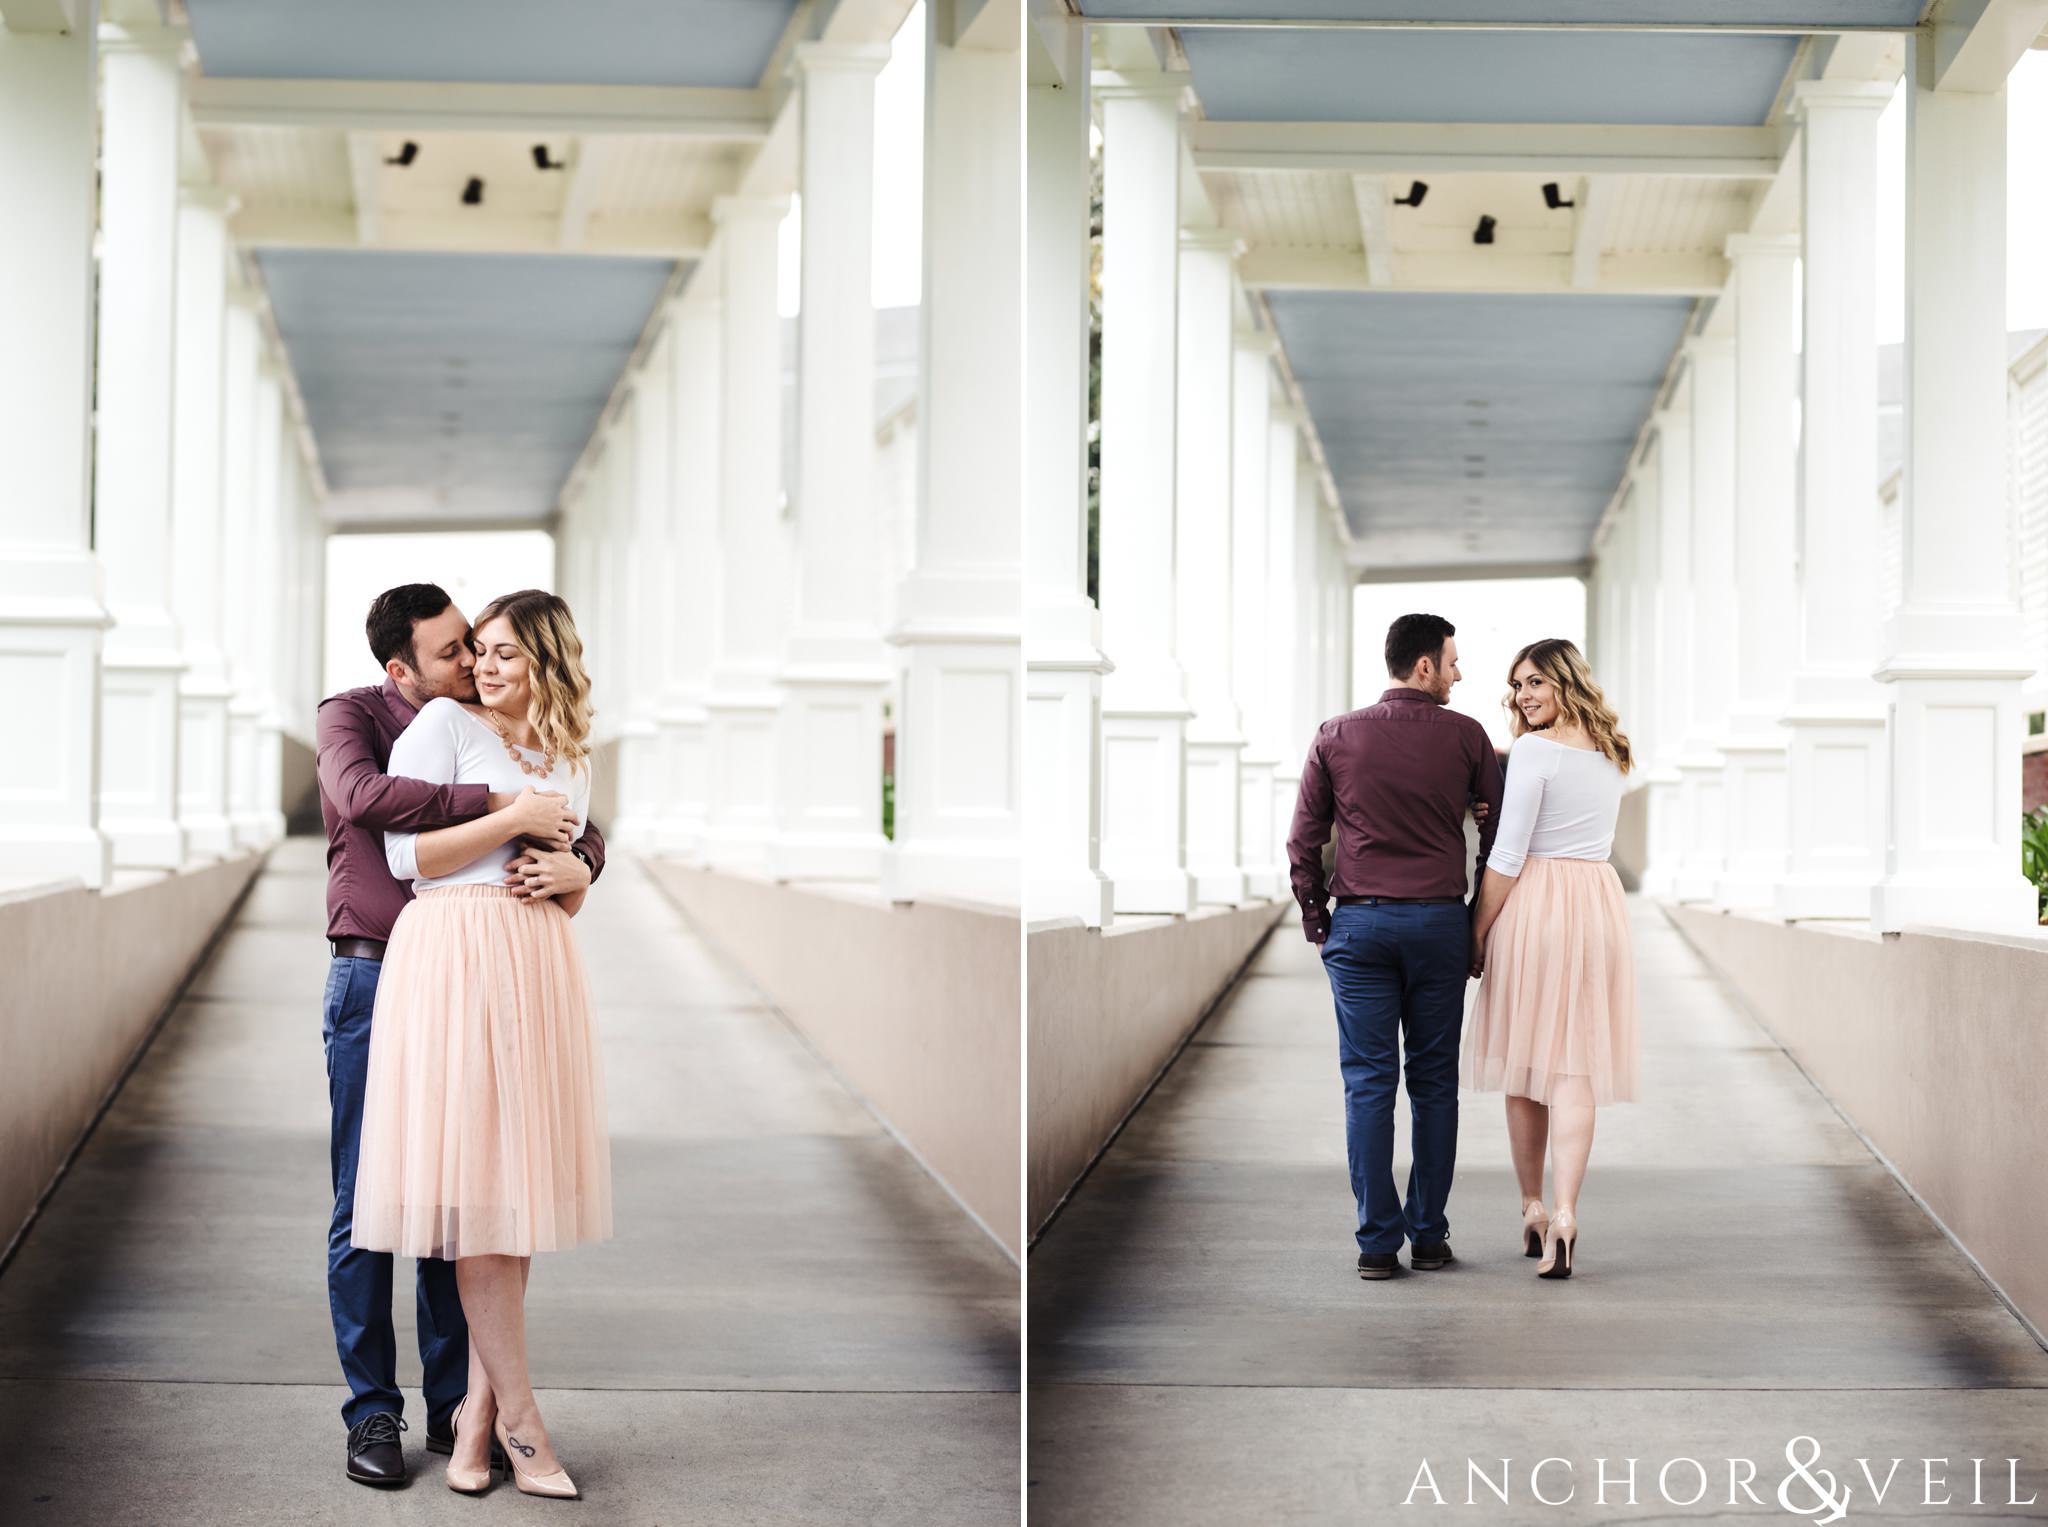 walking down the halls during their Disney world engagement session at the Boardwalk Hotel Inn